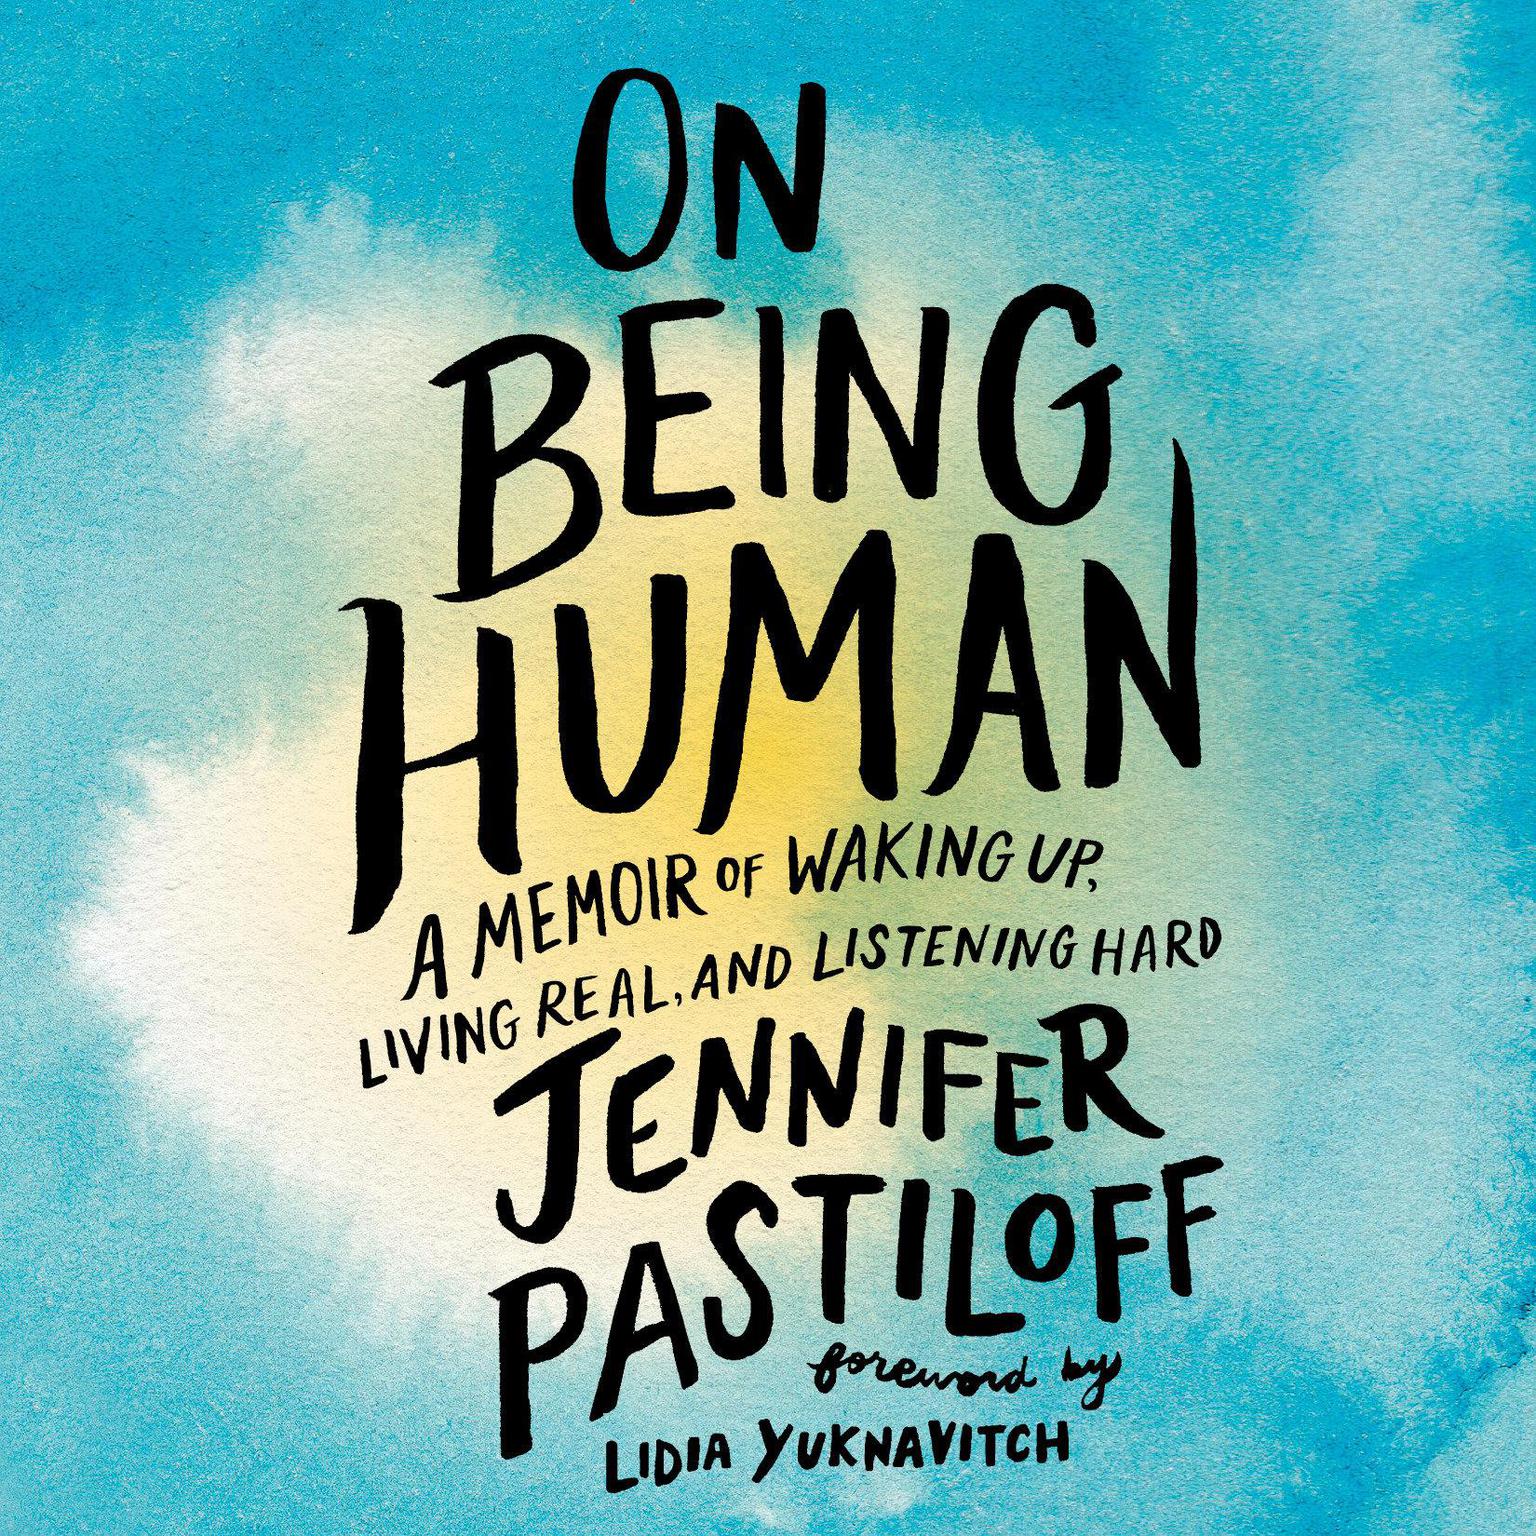 On Being Human: A Memoir of Waking Up, Living Real, and Listening Hard Audiobook, by Jennifer Pastiloff